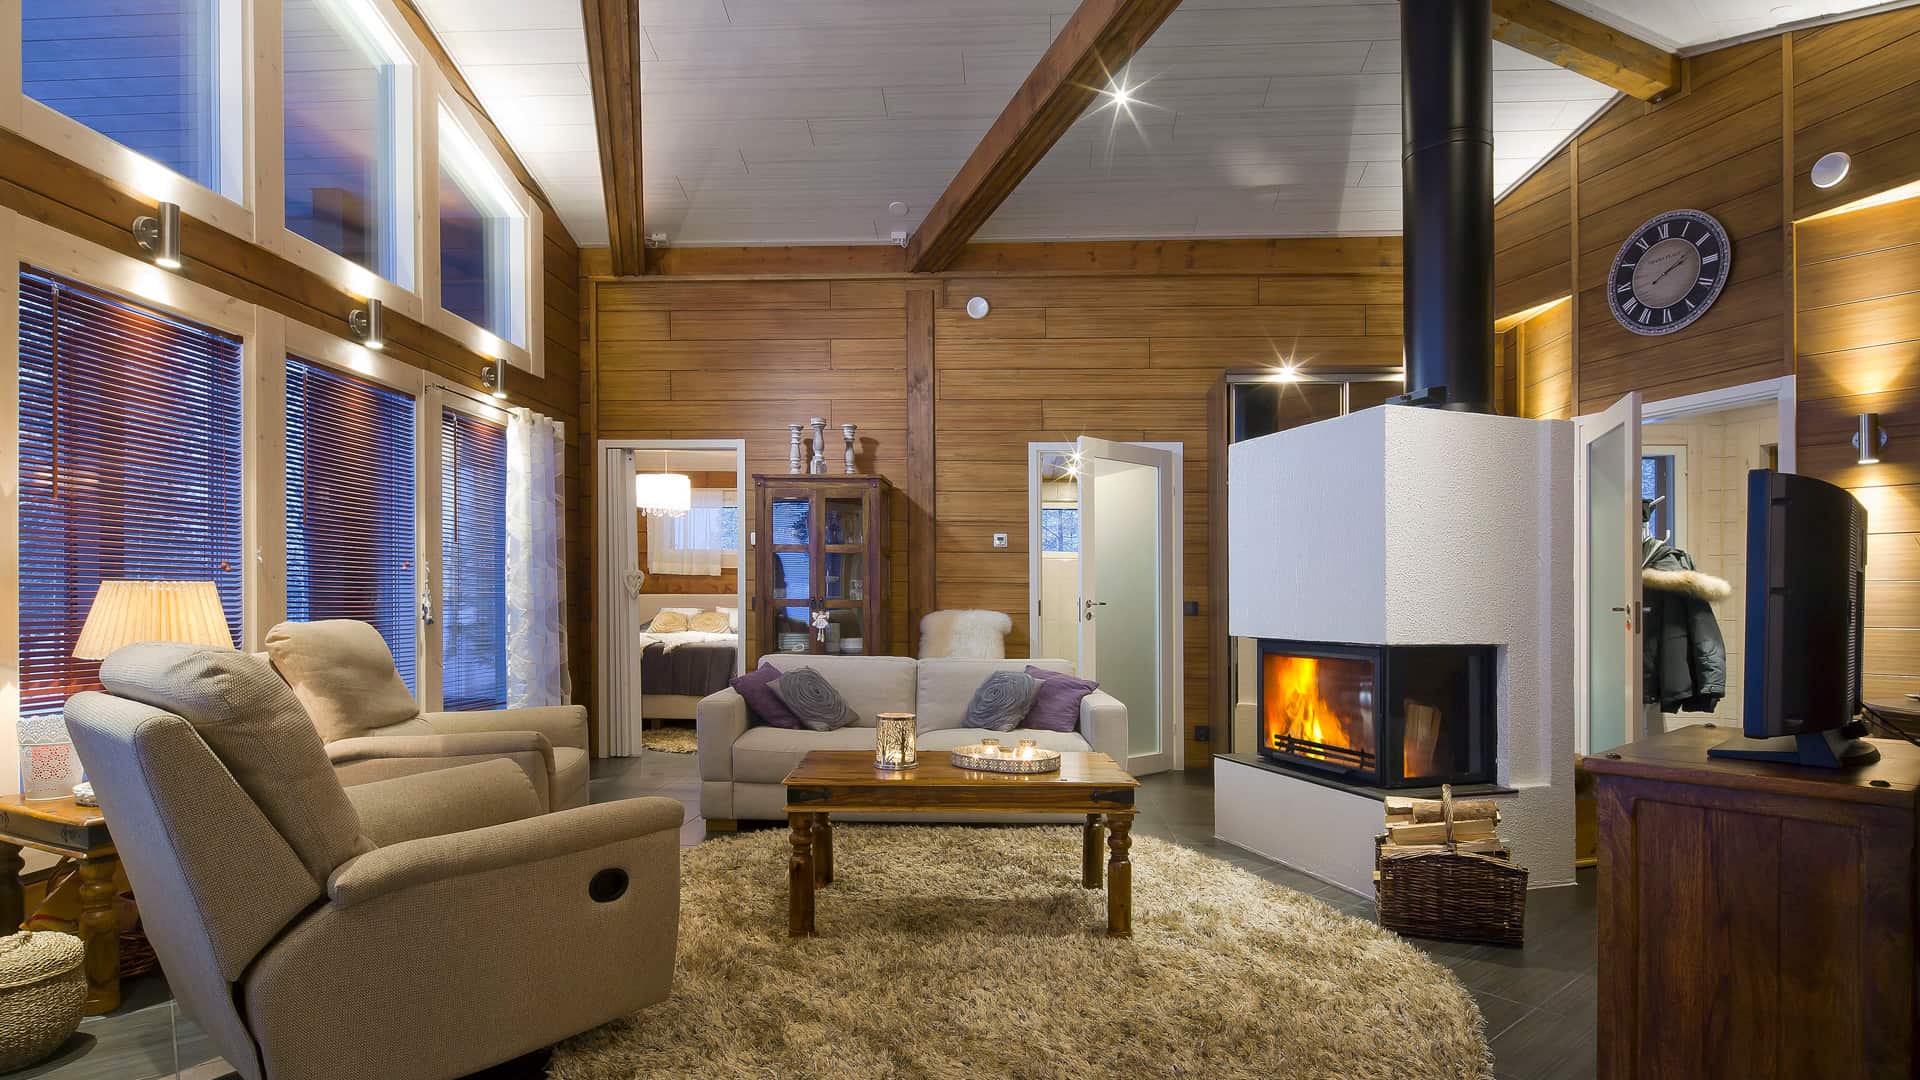 Spacious lounging area of Holiday home Nuuna. The fireplace at the middle gives a cosy feeling during cold winter days.